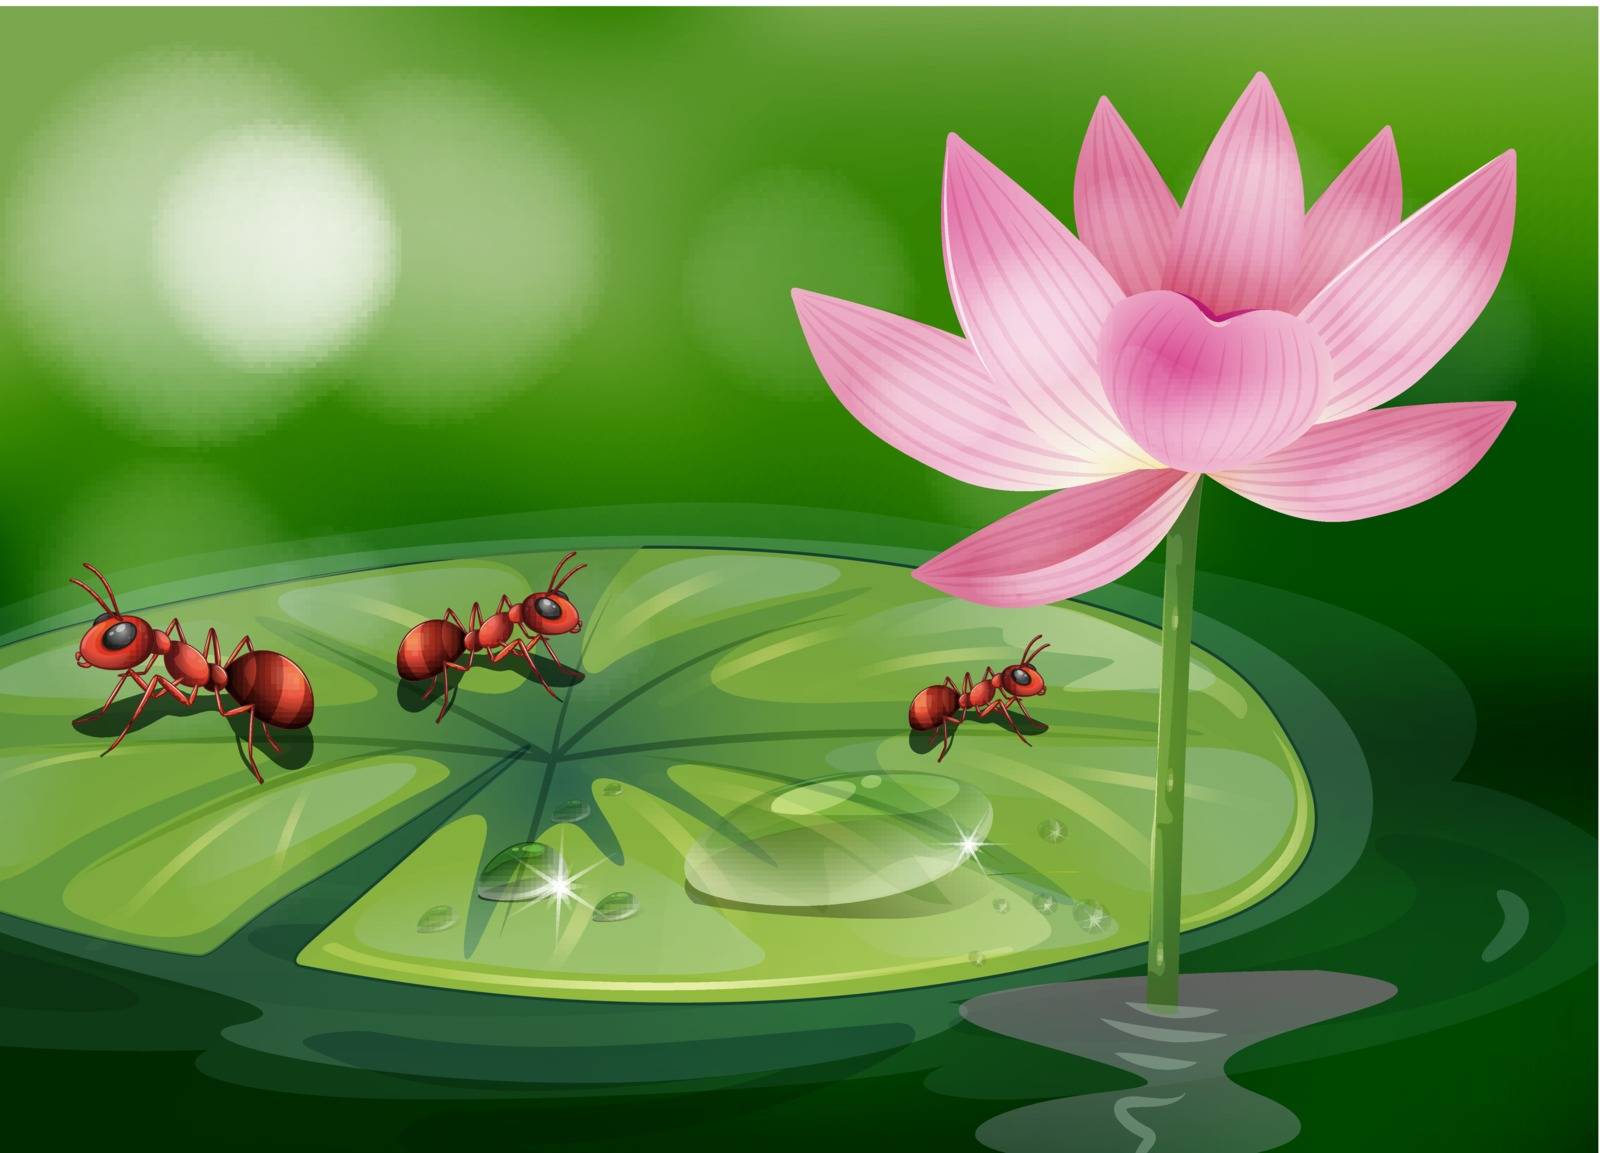 Illustration of the three ants above the waterlily plant